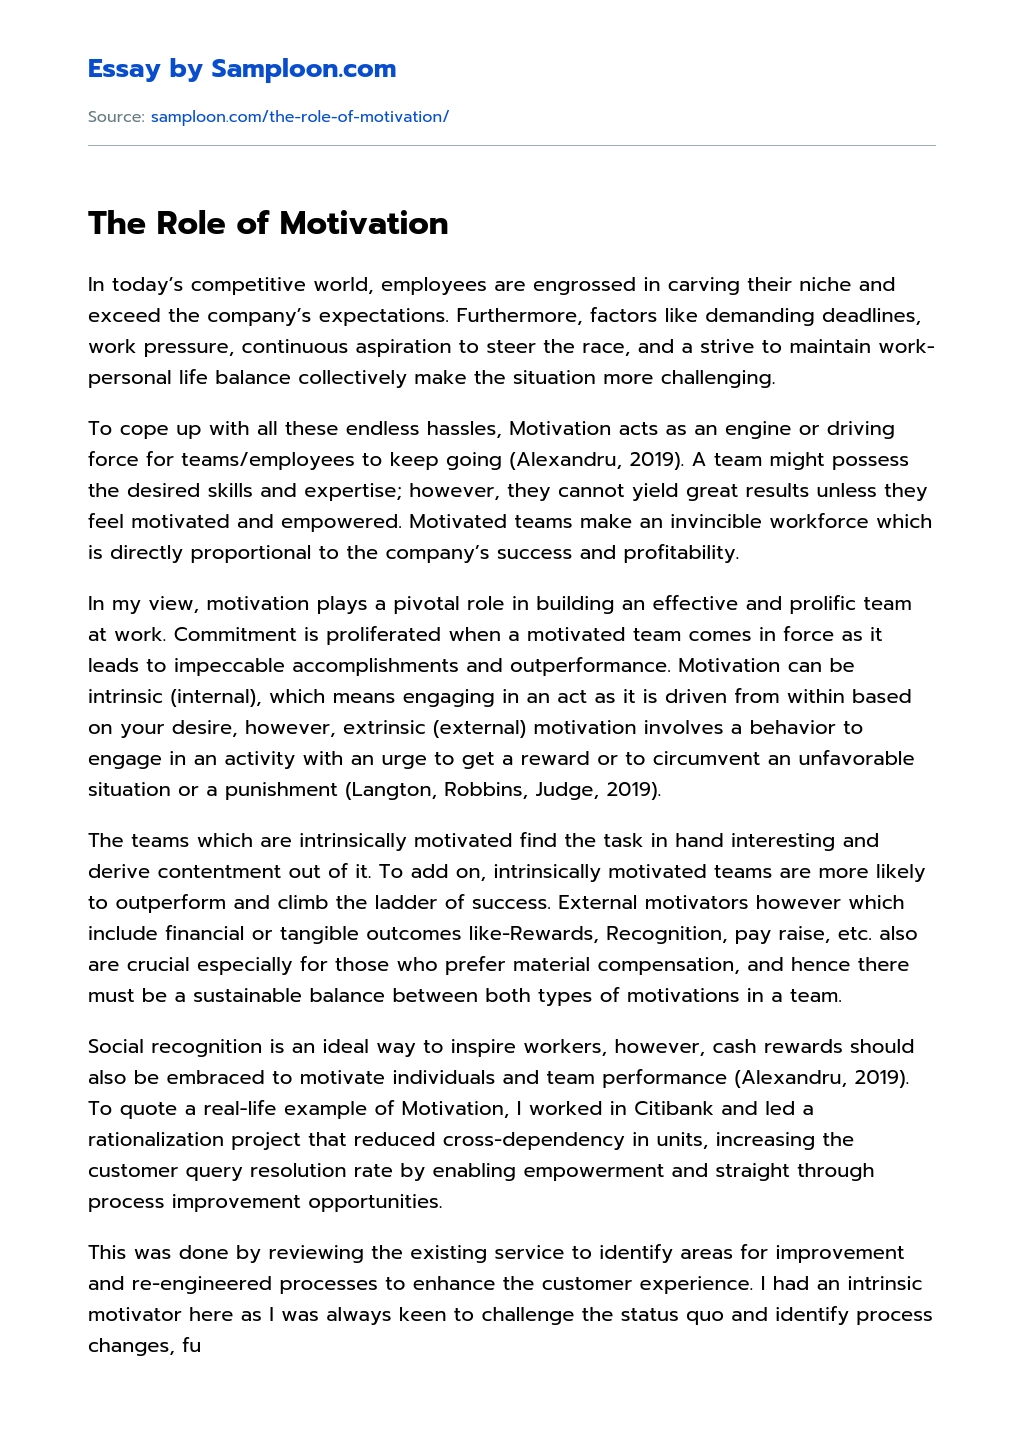 The Role of Motivation essay